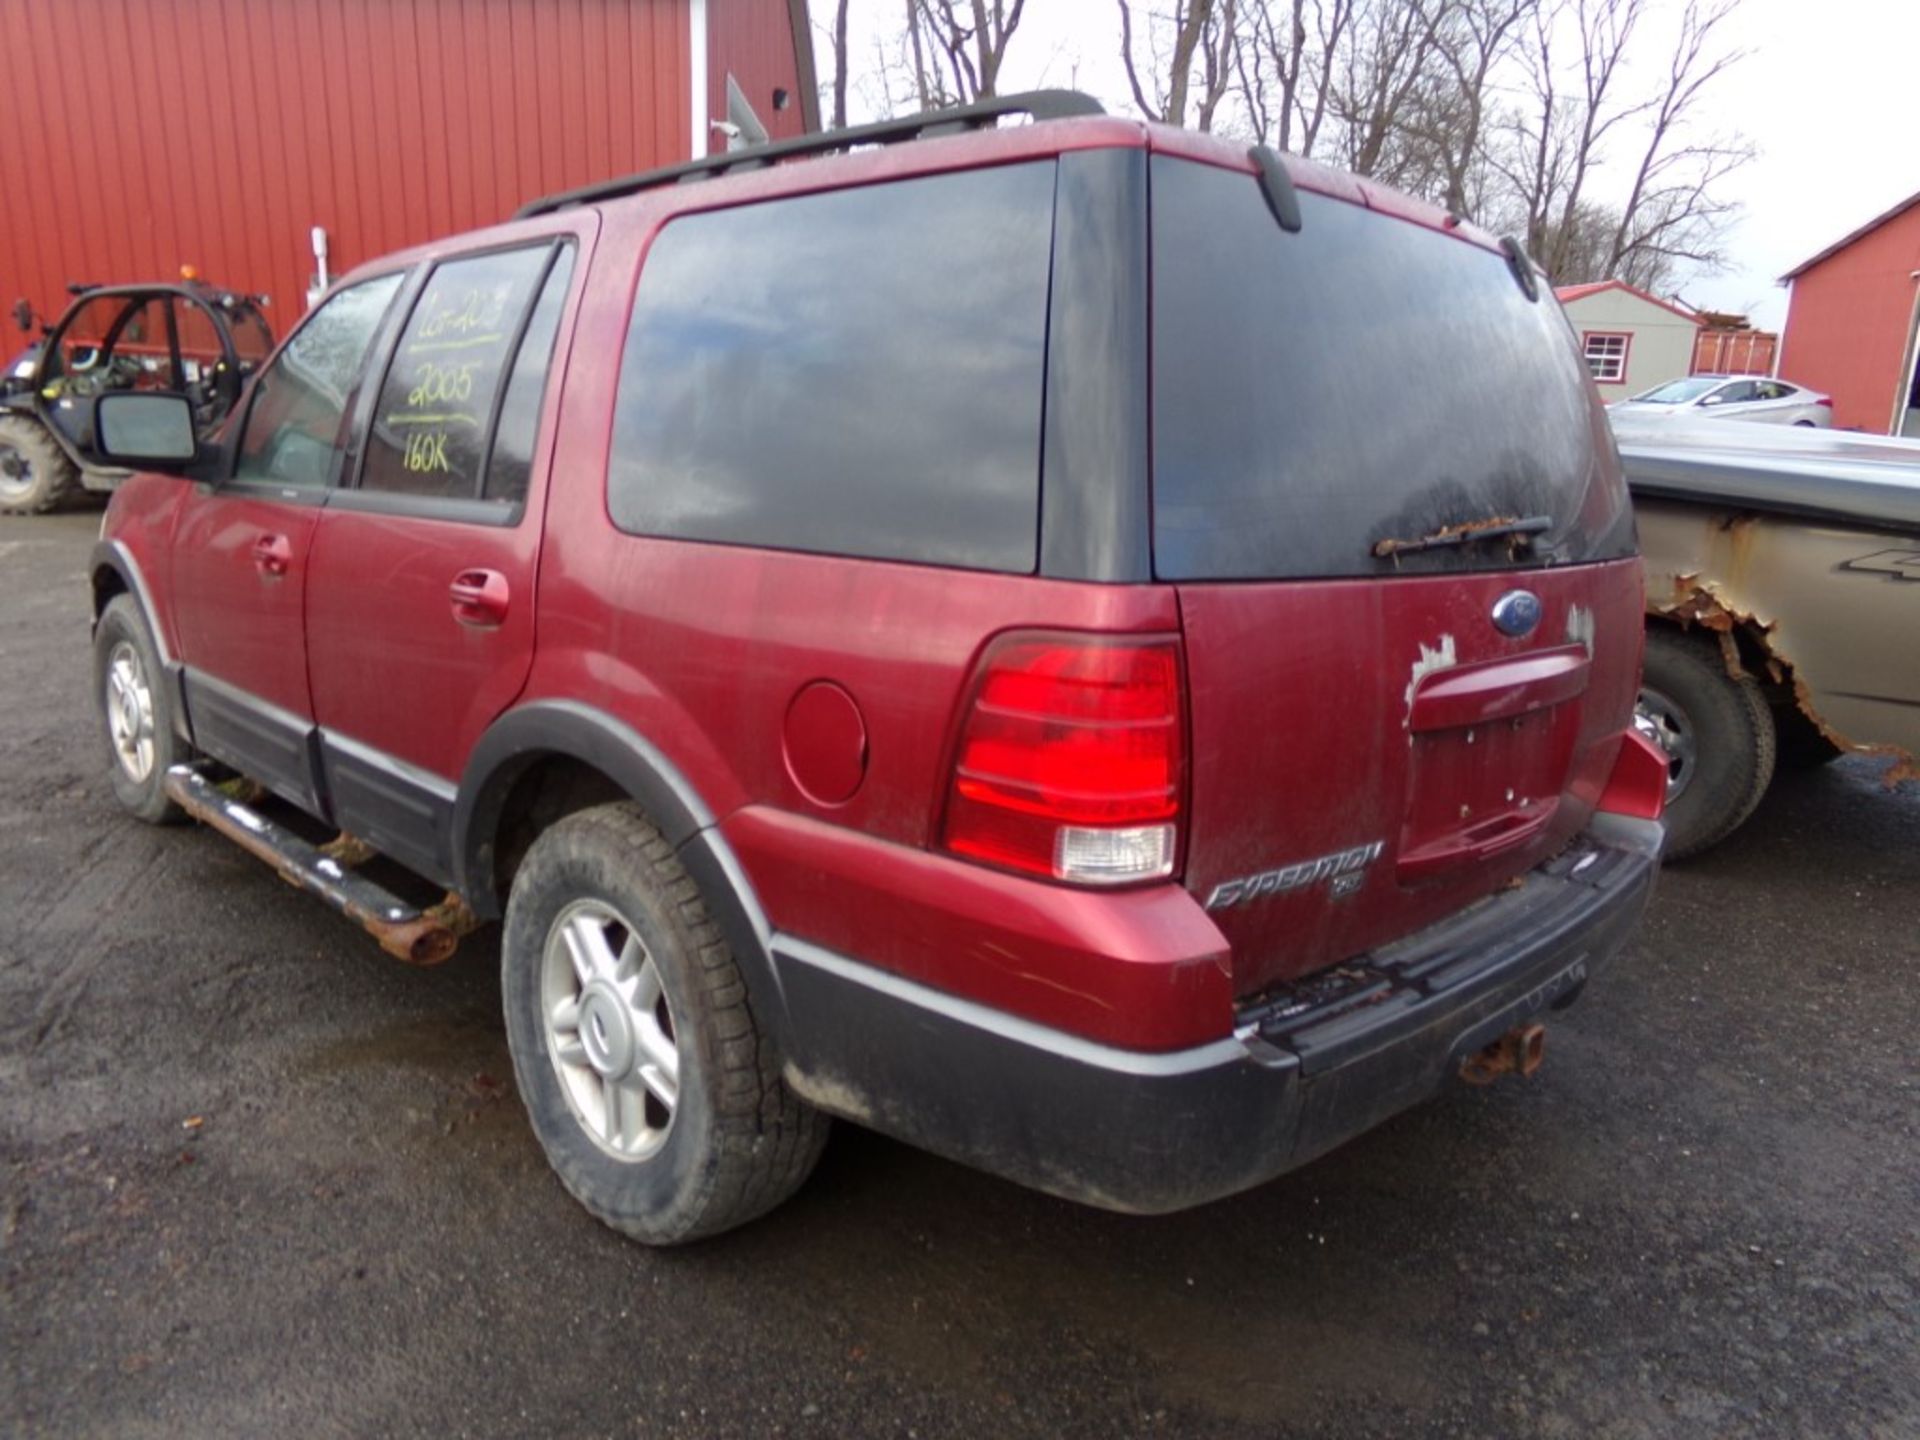 2005 Ford Expedition XLT, Maroon, 160,556 Miles, VIN#:1FMPU16515LA14681 - OPEN TO ALL BUYERS, - Image 2 of 8